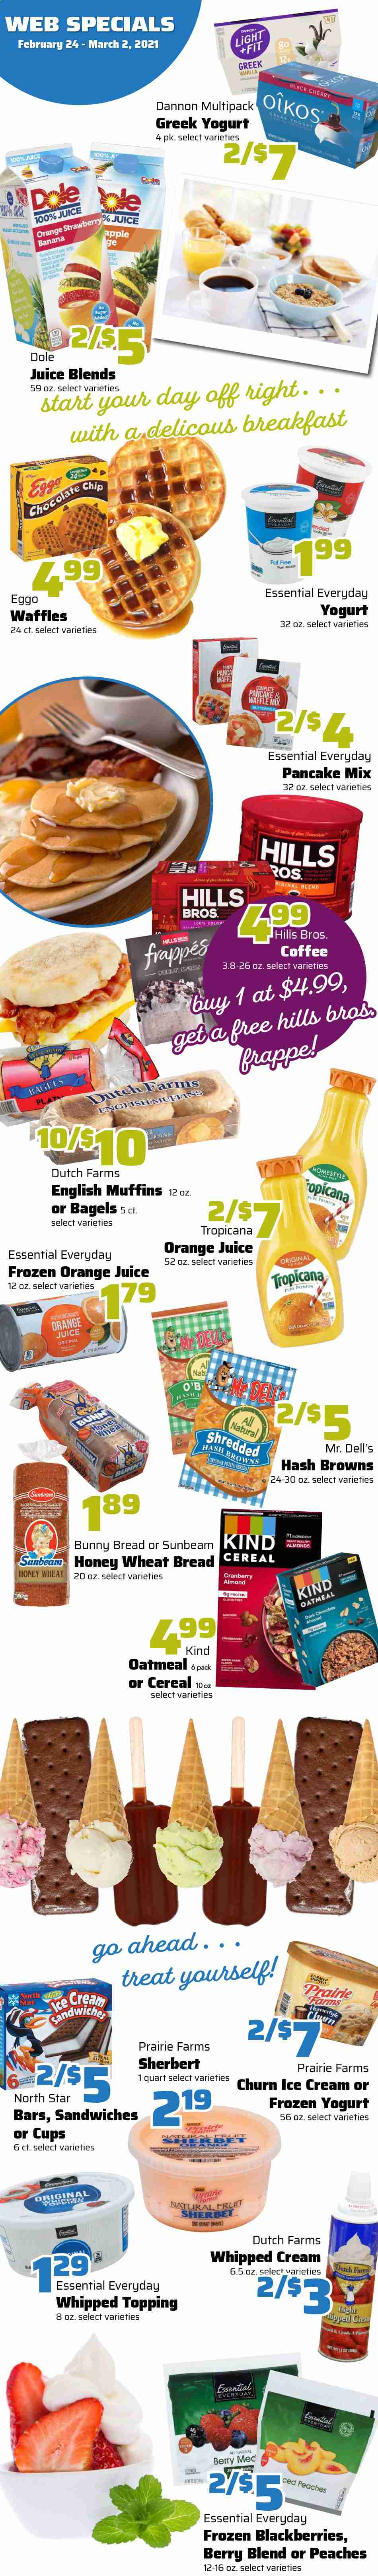 thumbnail - County Market Flyer - 02/24/2021 - 03/02/2021 - Sales products - Dole, blackberries, wheat bread, bagels, pancakes, muffin, waffles, english muffins, hash browns, greek yoghurt, yoghurt, Oikos, Dannon, buttermilk, whipped cream, ice cream, sherbet, chocolate, oatmeal, topping, cranberries, almonds, orange juice, juice, coffee. Page 1.